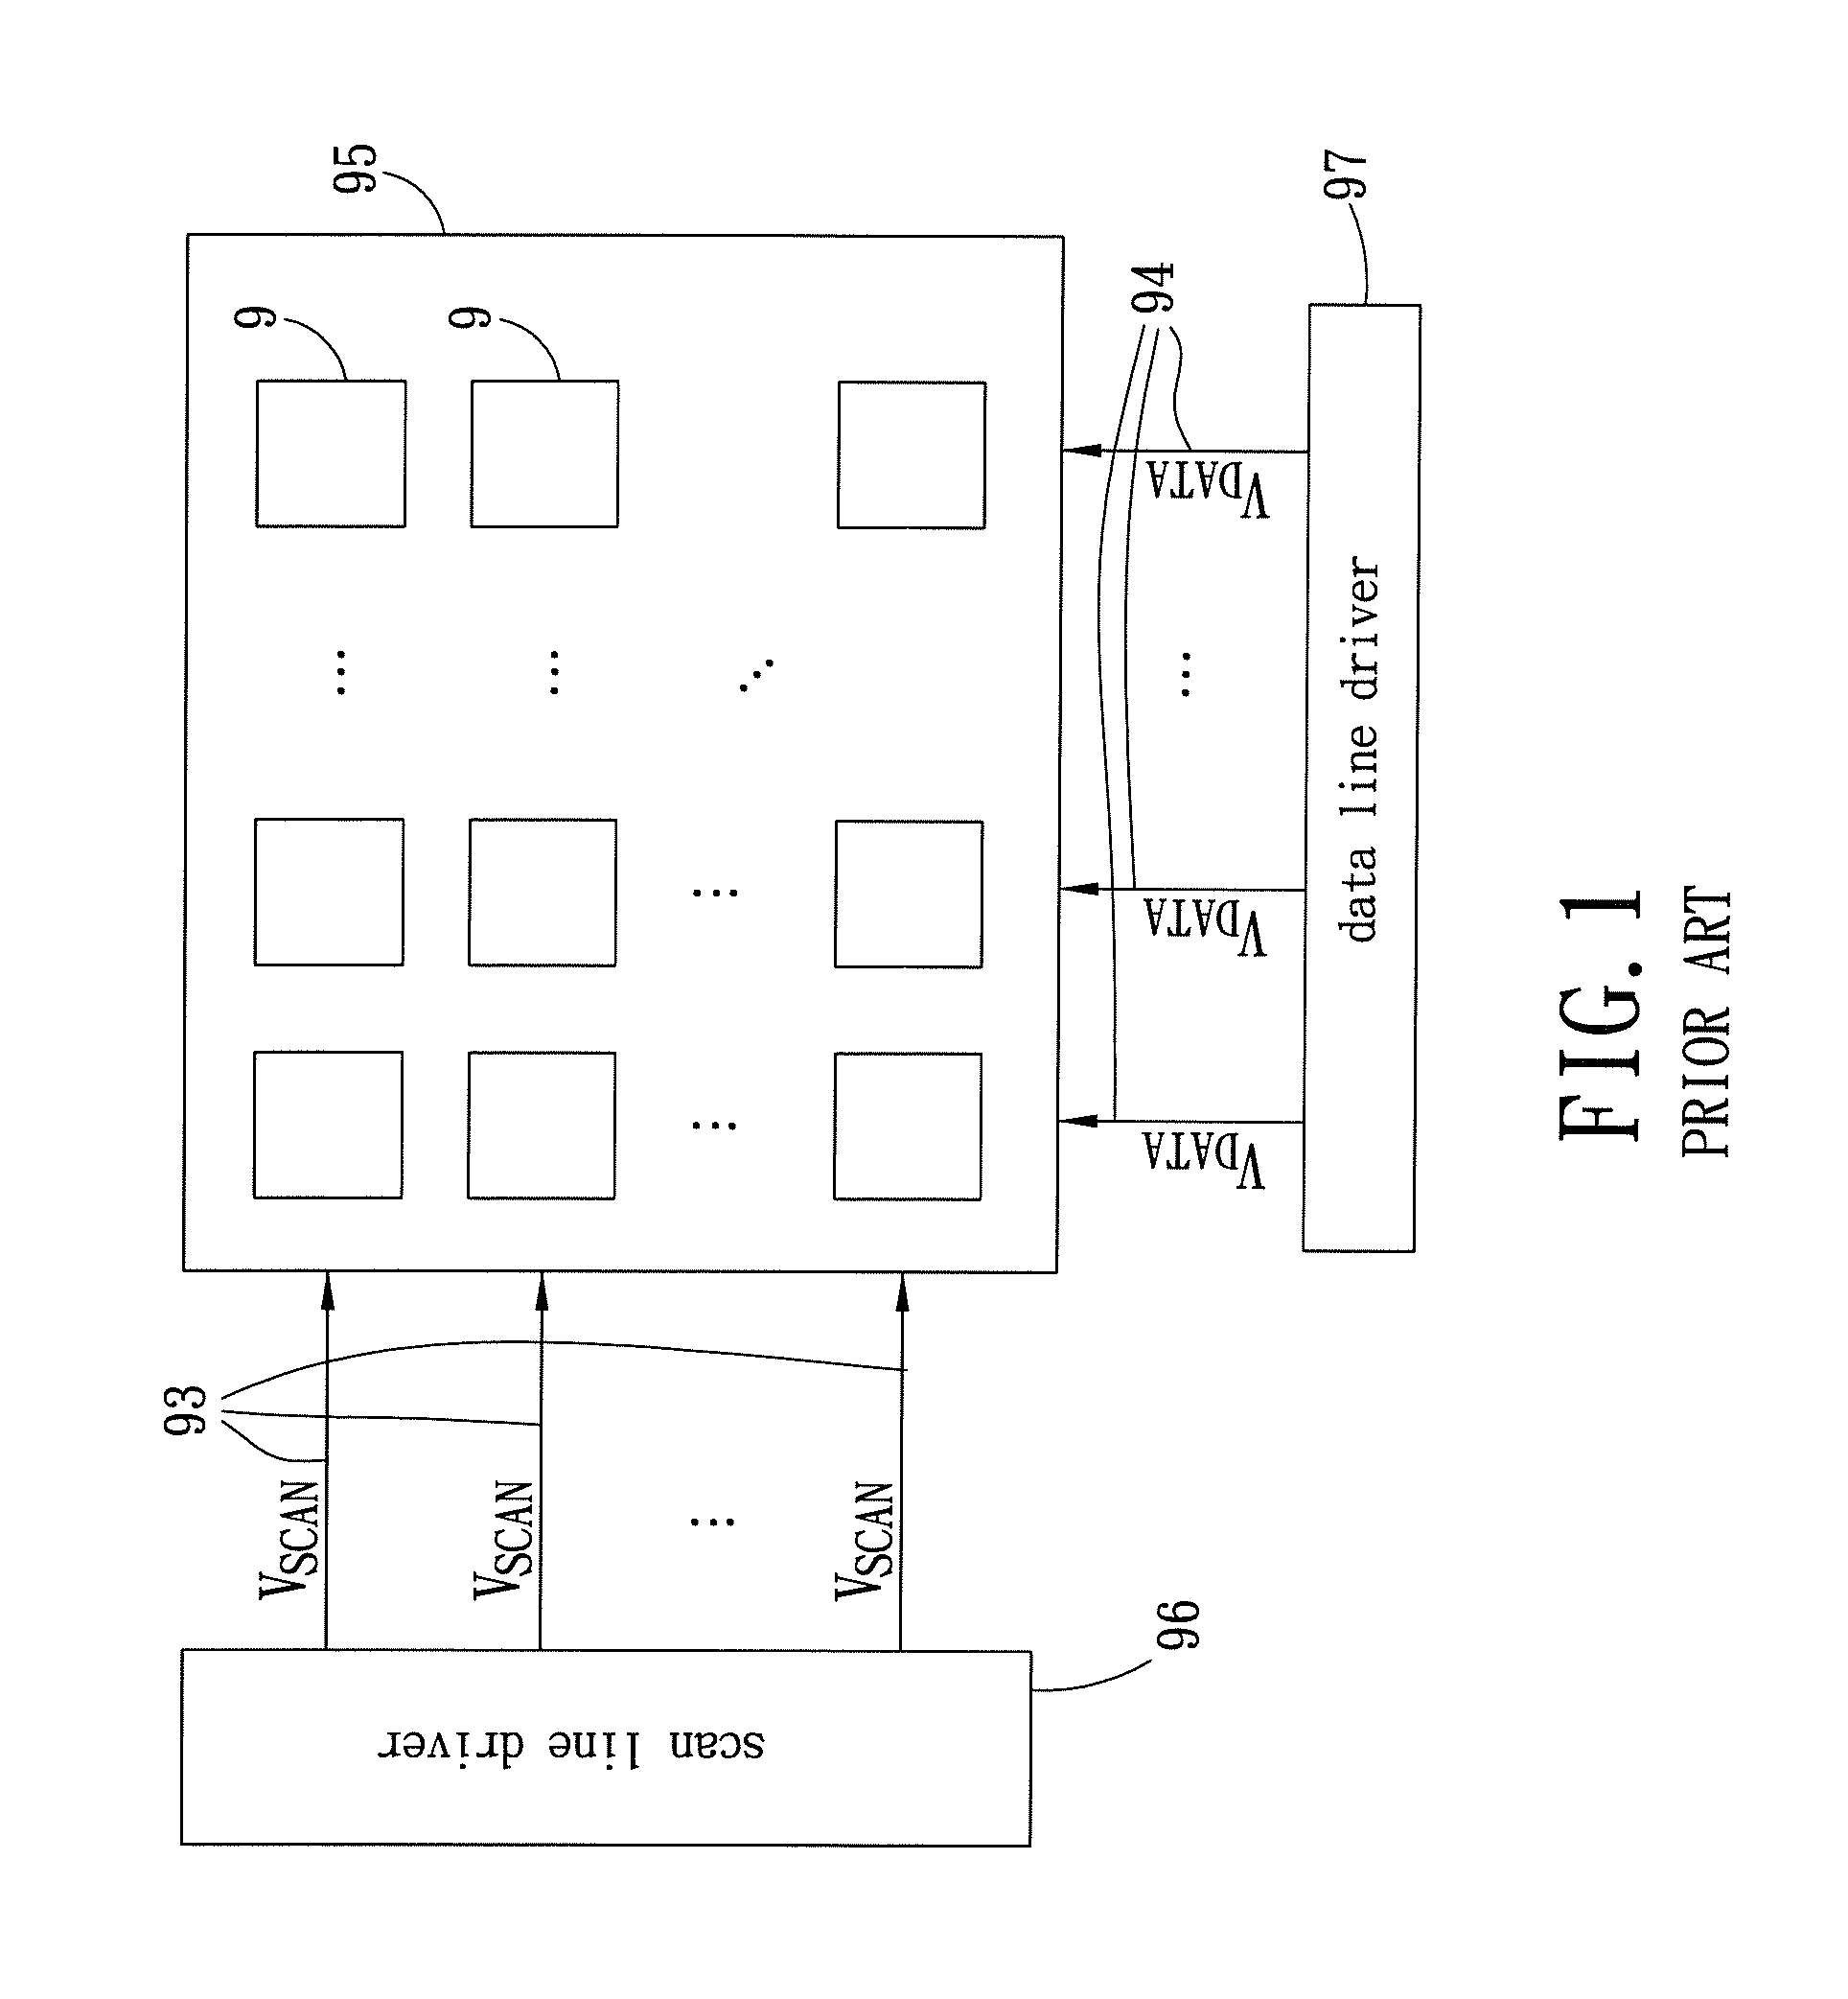 Display and compensation circuit therefor